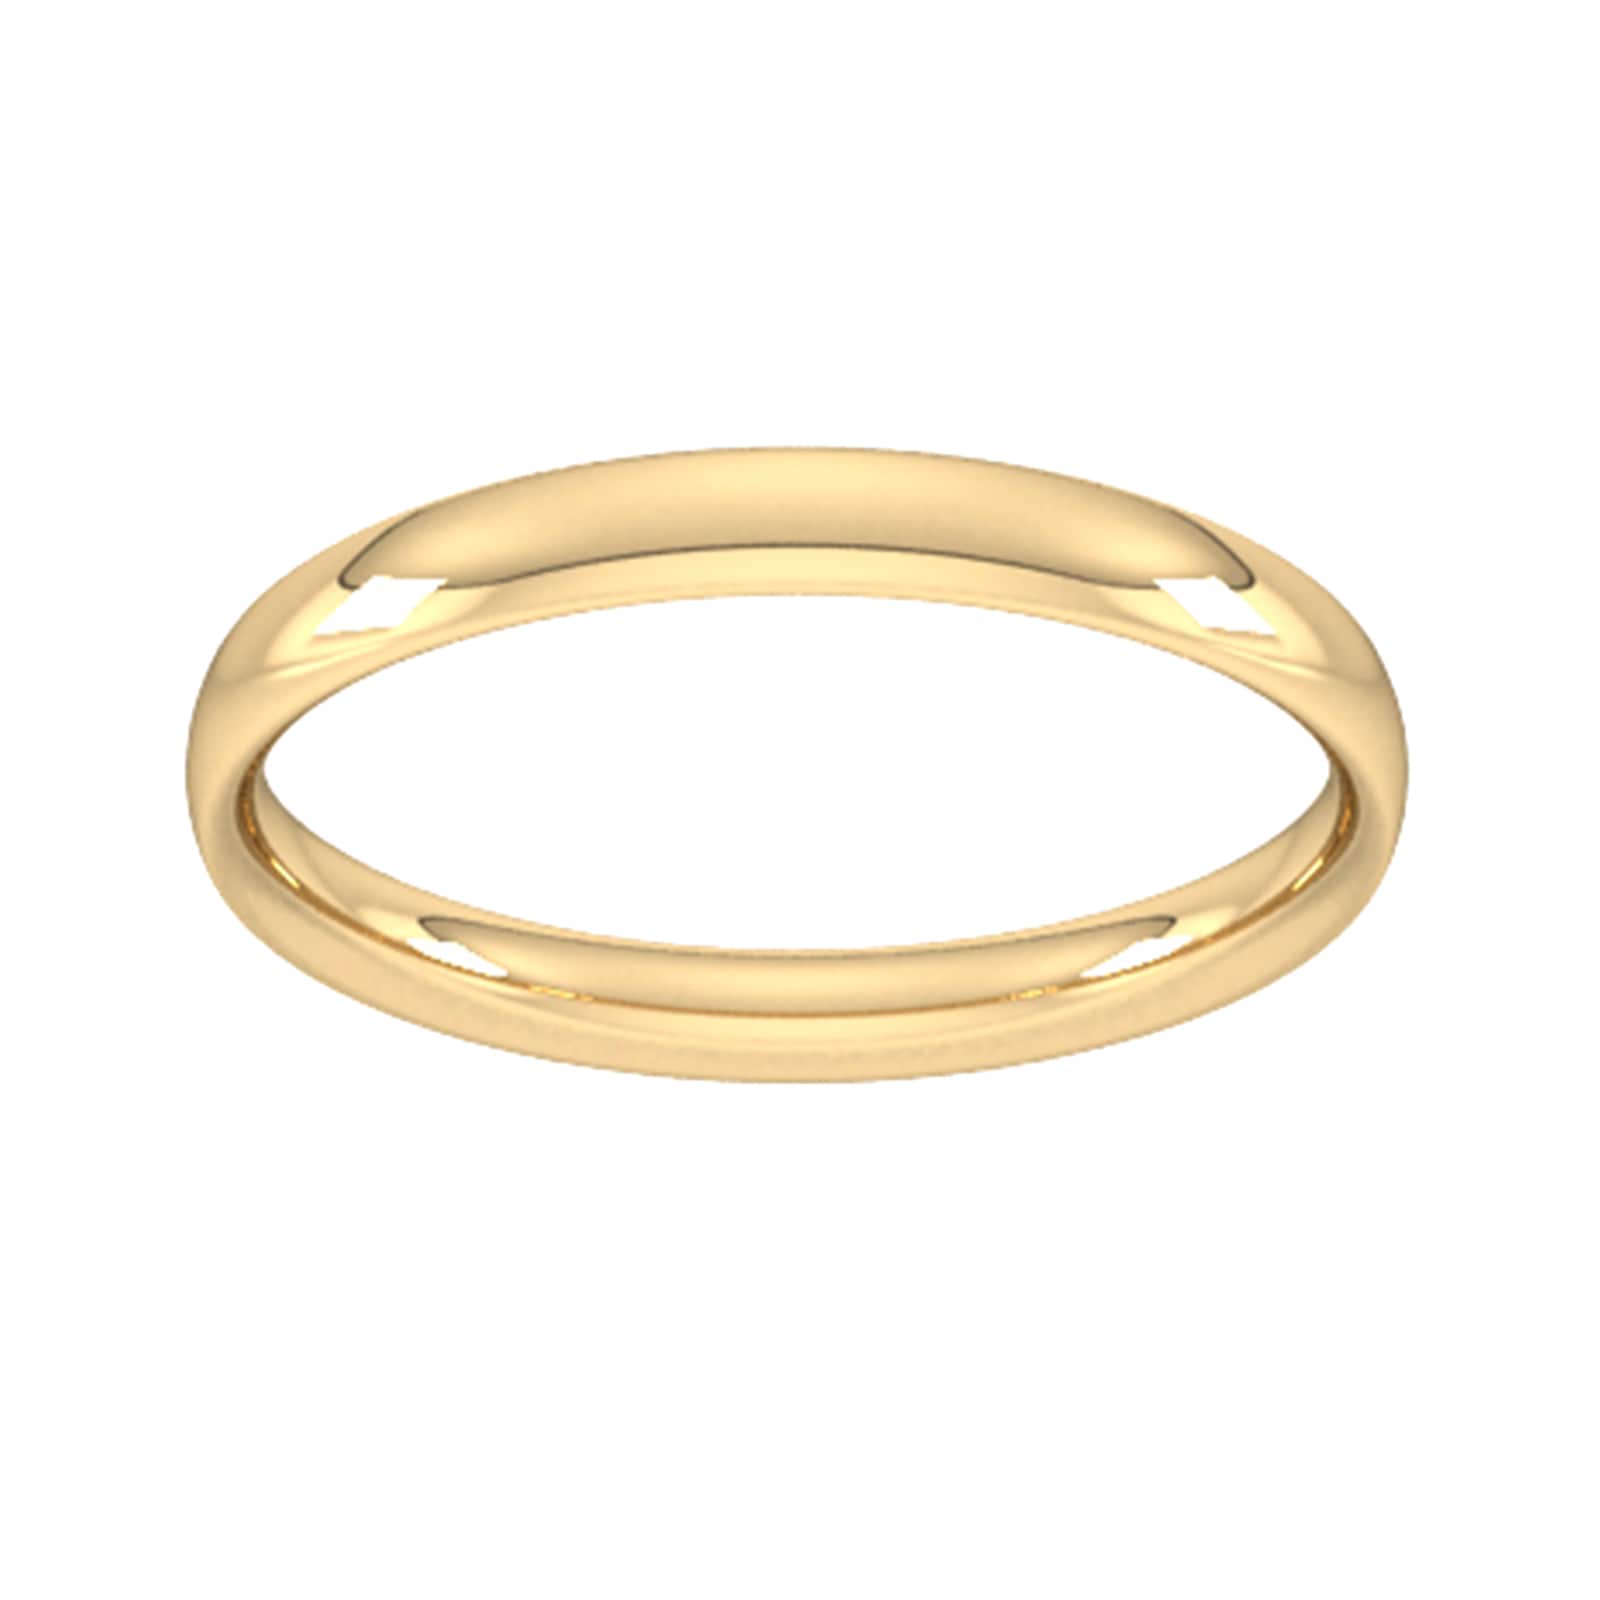 2.5mm Traditional Court Standard Wedding Ring In 18 Carat Yellow Gold - Ring Size J